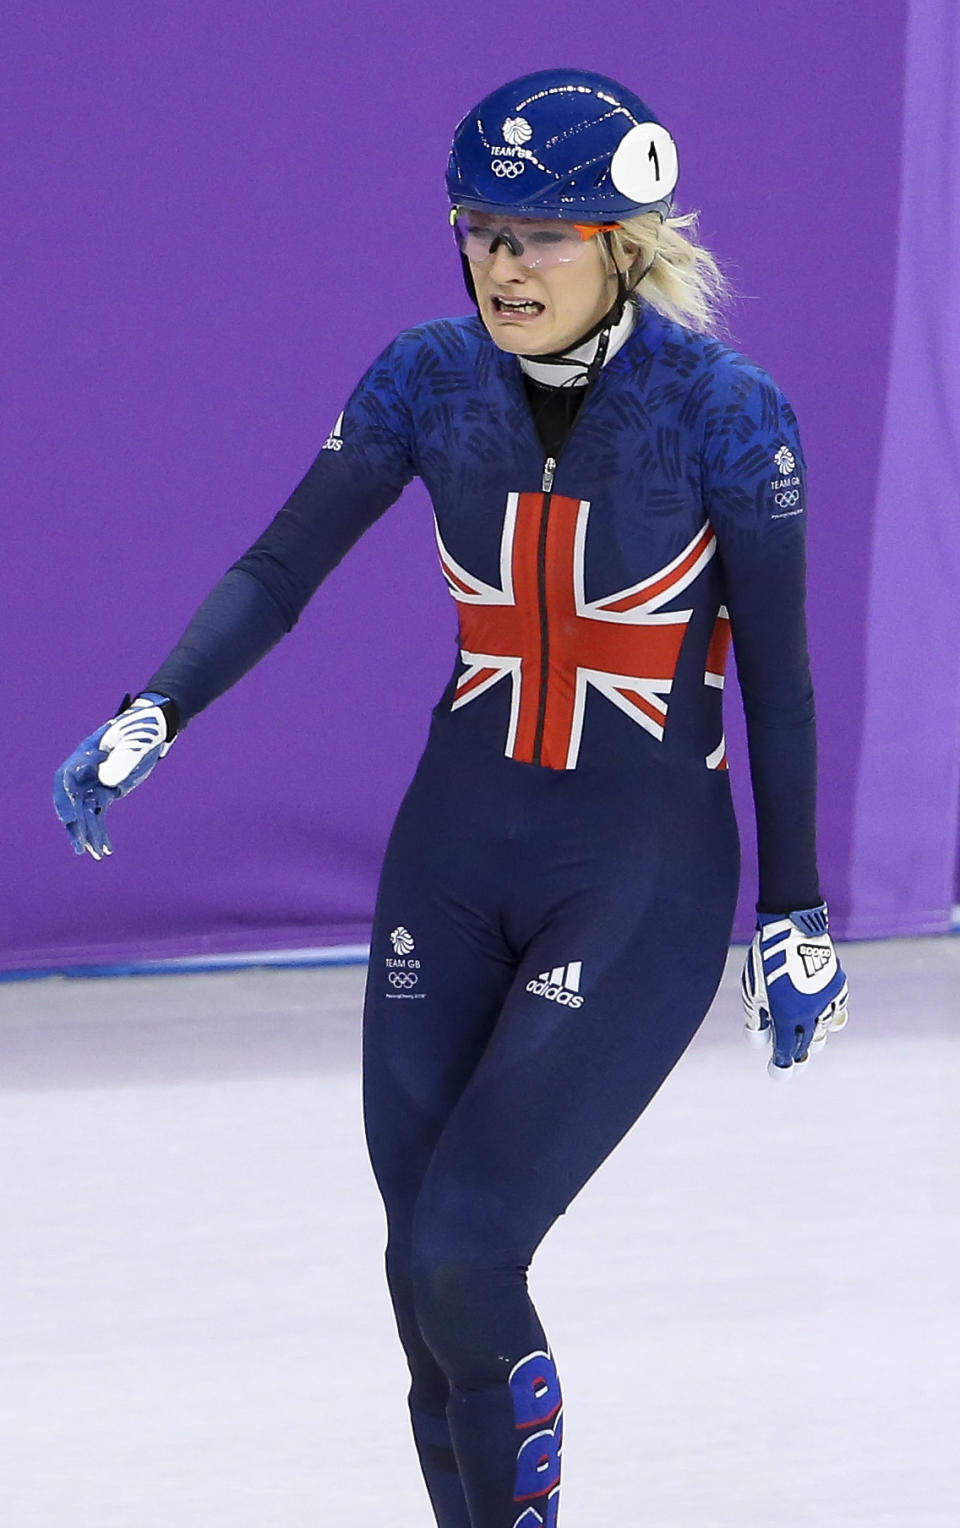 <p>Elise Christie of Great Britain cries after crashing during the Ladies’ 500m Short Track Speed Skating final on day four of the PyeongChang 2018 Winter Olympic Games at Gangneung Ice Arena on February 13, 2018 in Gangneung, South Korea. (Photo by Jean Catuffe/Getty Images) </p>